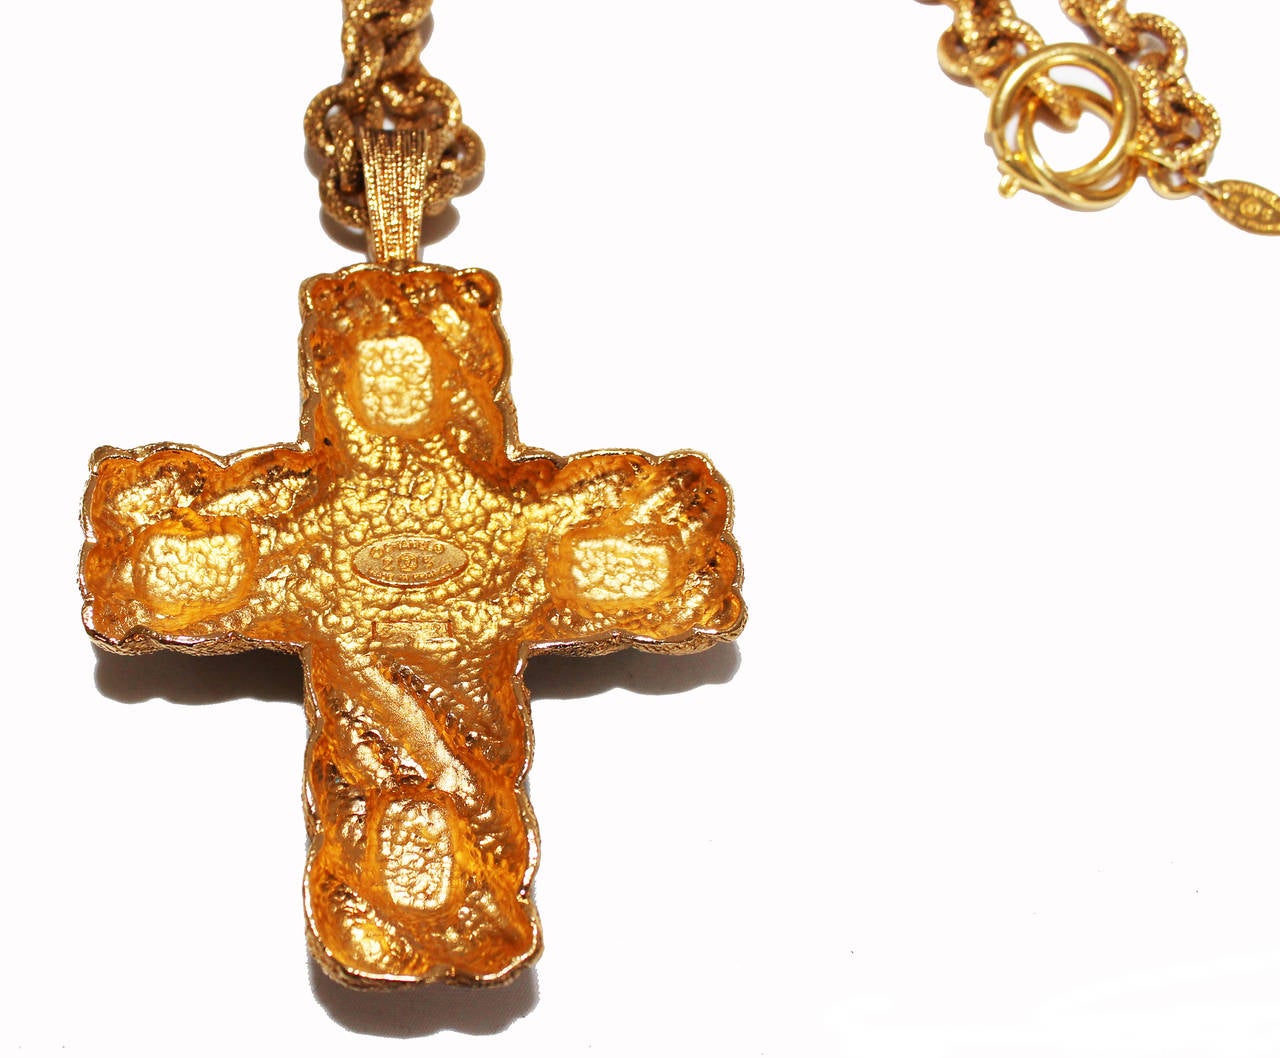 A fabulous find of Chanel,  back to the byzantine style, the favorite Style of Mademoiselle Chanel. A really rare find in excellent condition. Just to die for... Size of the cross: 7 x 6 cm - length of chain: 90 cm. Made of gold plated metal,